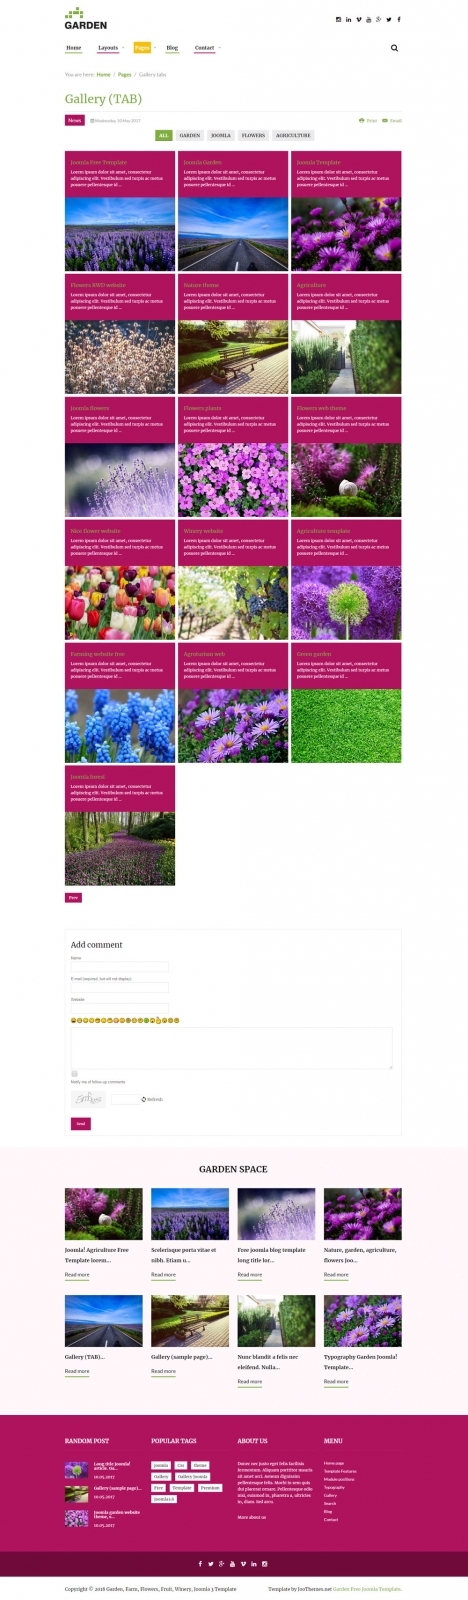 Demo Joomla 3 Garden Template layout gallery isotope tabs
